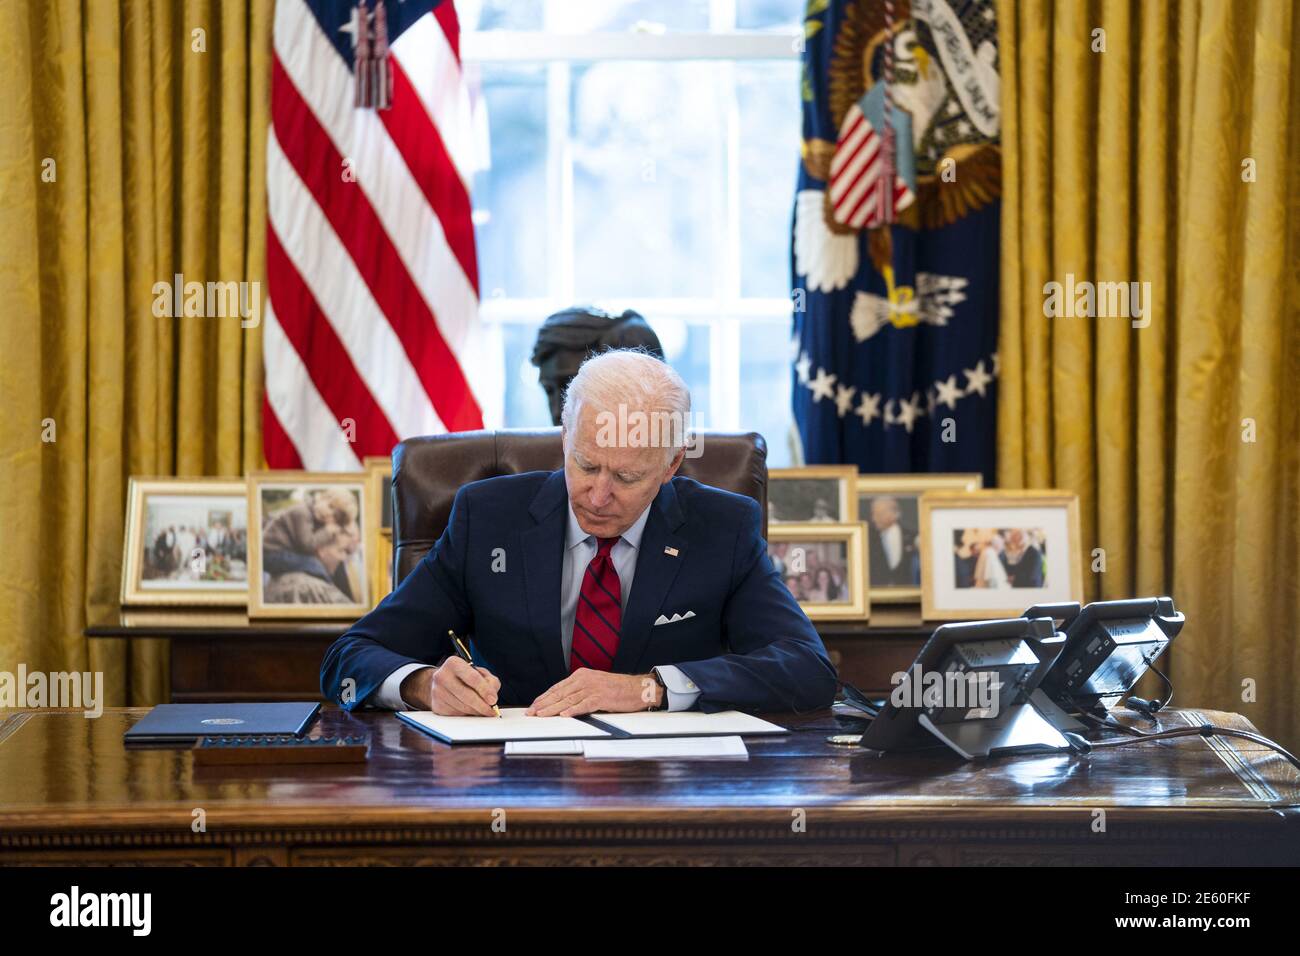 President Joe Biden signs executive actions strengthening AmericansâÂ€Â™ access to quality, affordable health care, in the Oval Office, Thursday, Jan. 26, 2021. (Photo by Doug Mills/The New York Times) Stock Photo